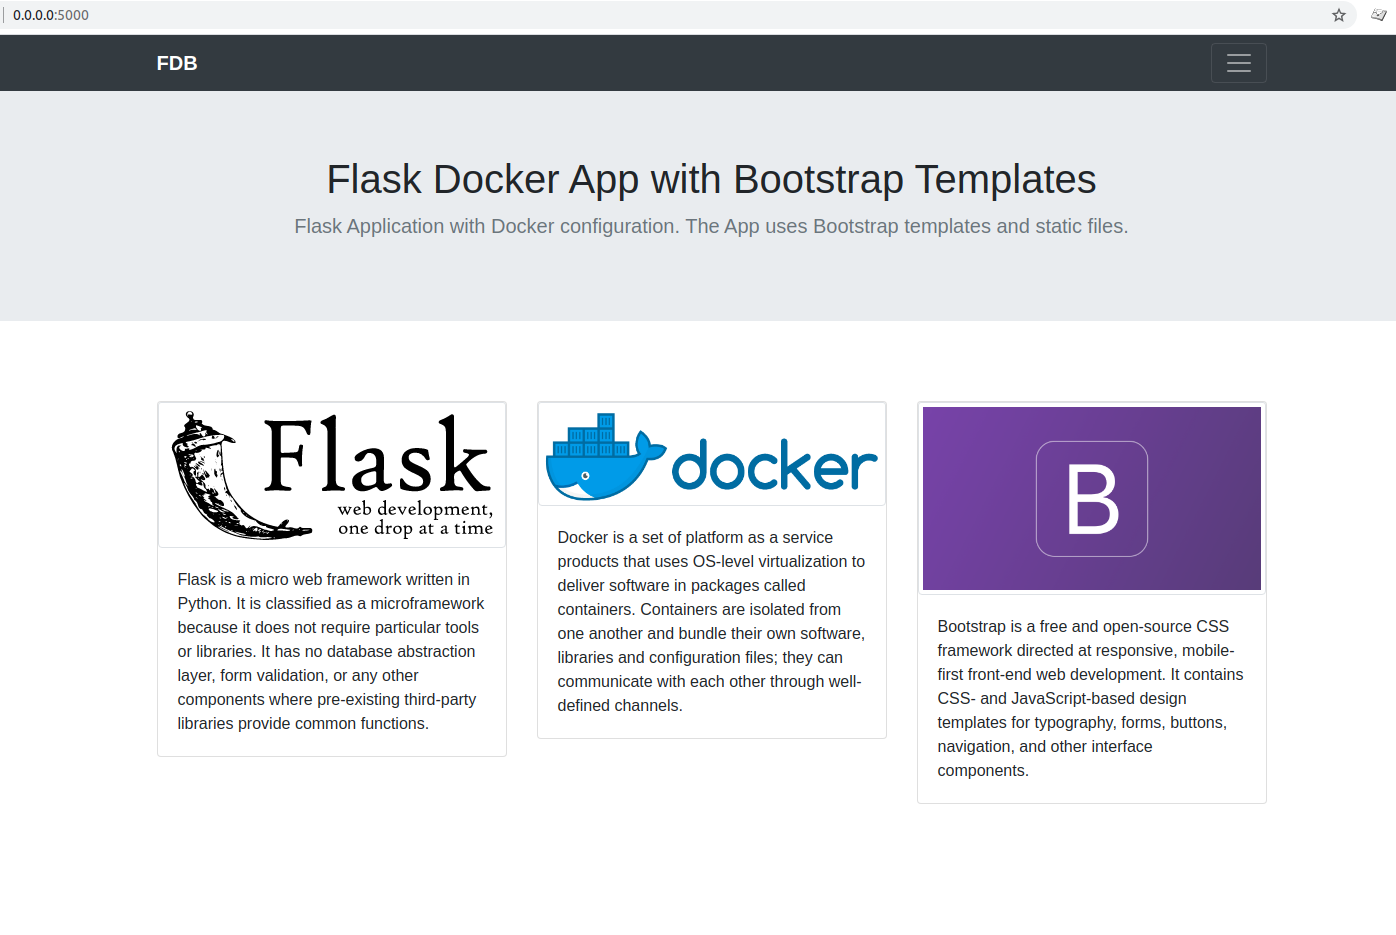 Develop Flask Application using Docker and Bootstrap Templates